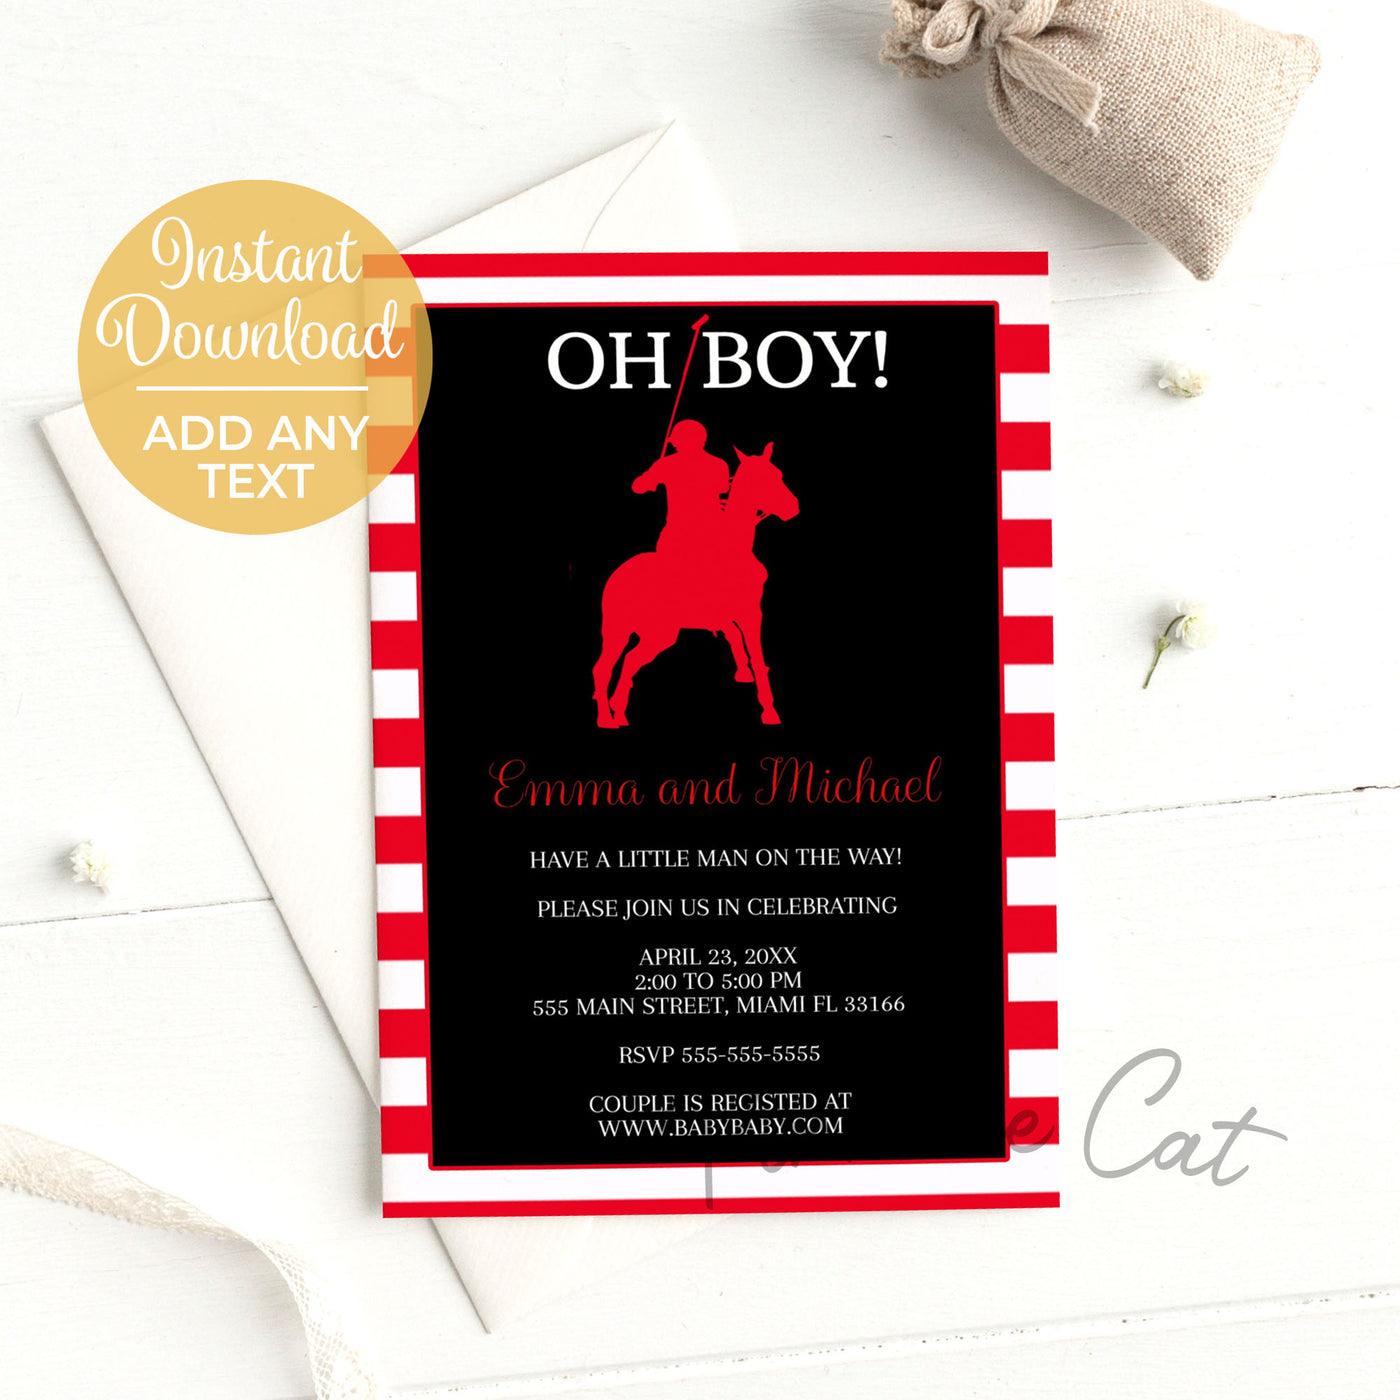 Polo Invitation For Baby Shower Or Birthday Black Red Printable Pink The Cat